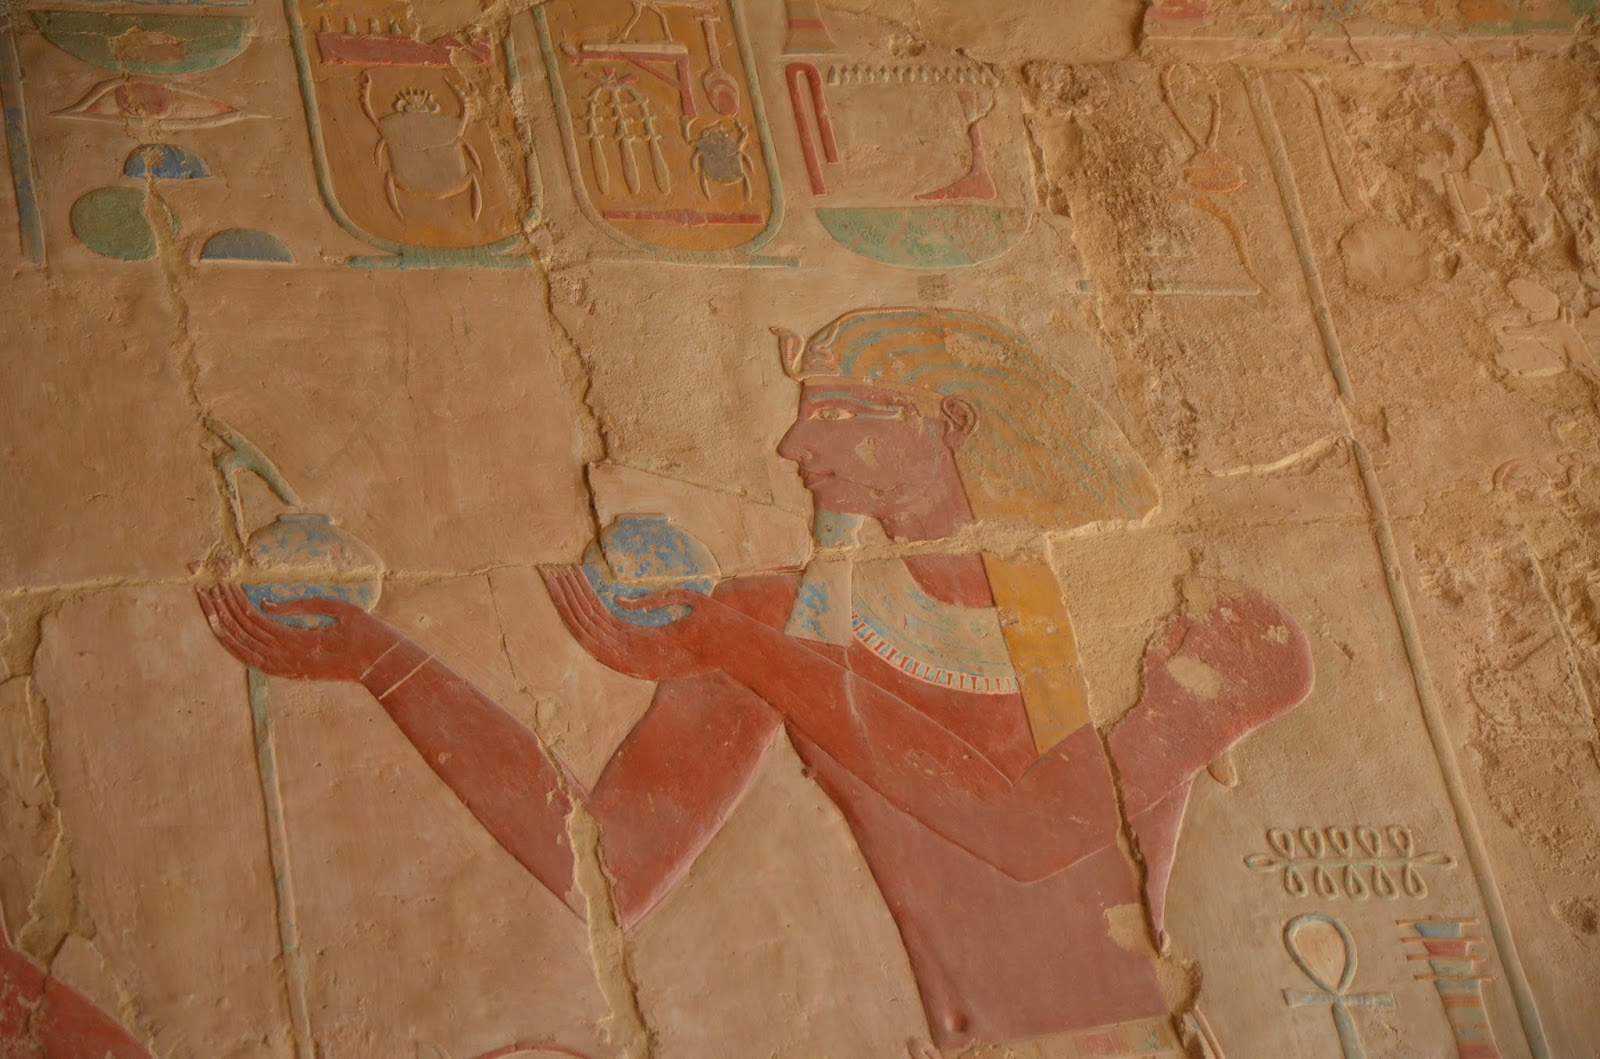 Hieroglyphics in the Chapel of Anubis at the Temple of Hatshepsut in Luxor, Egypt